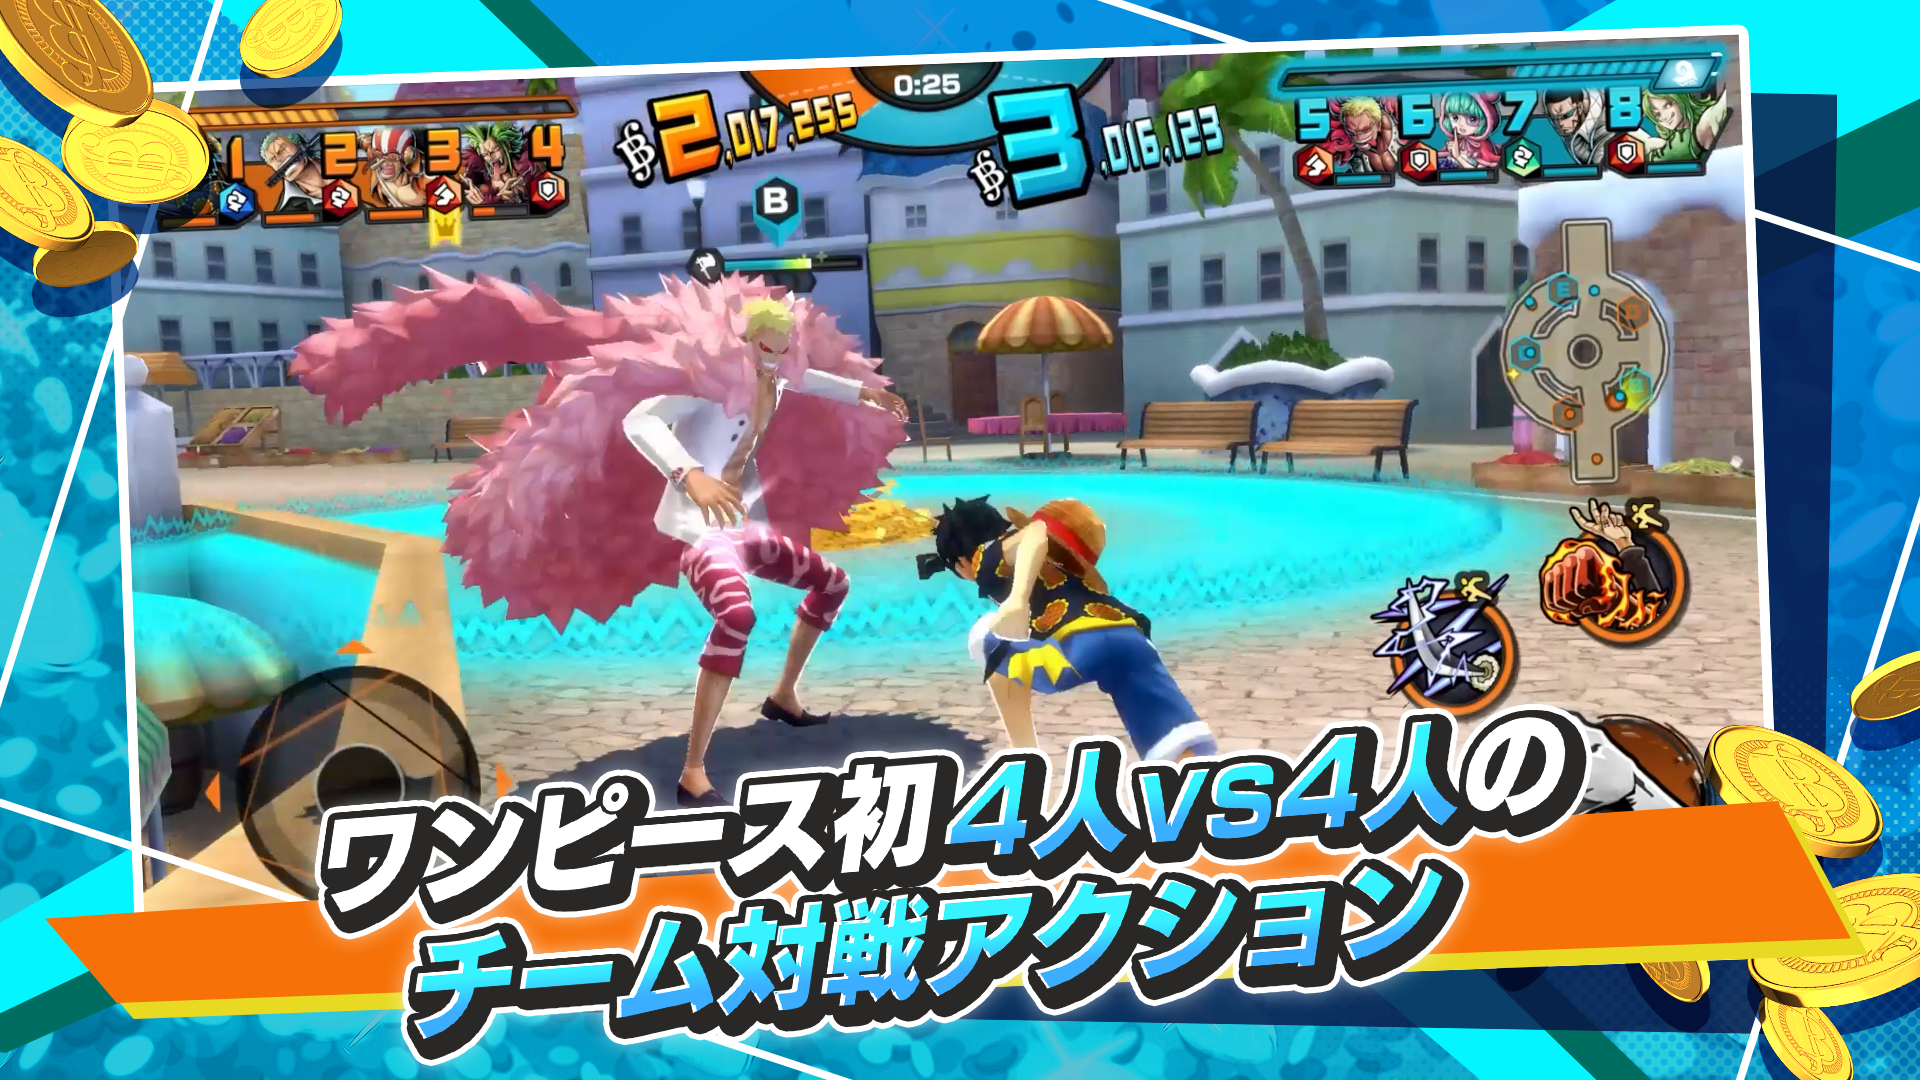 Is One Piece Bounty Rush Worth Playing In 2022? 